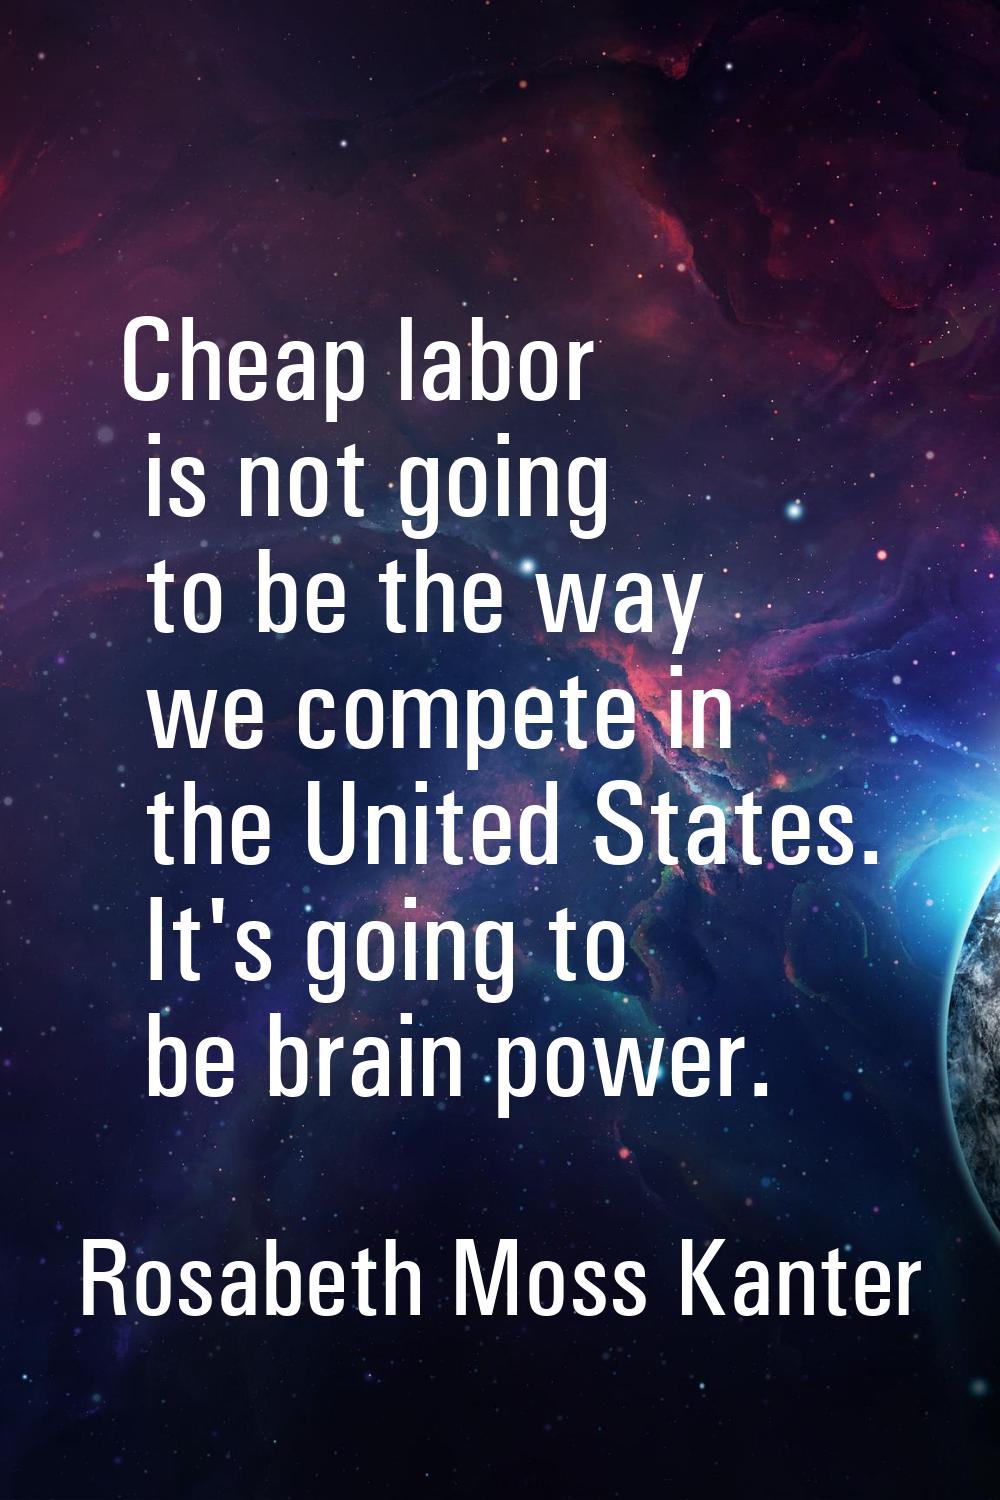 Cheap labor is not going to be the way we compete in the United States. It's going to be brain powe